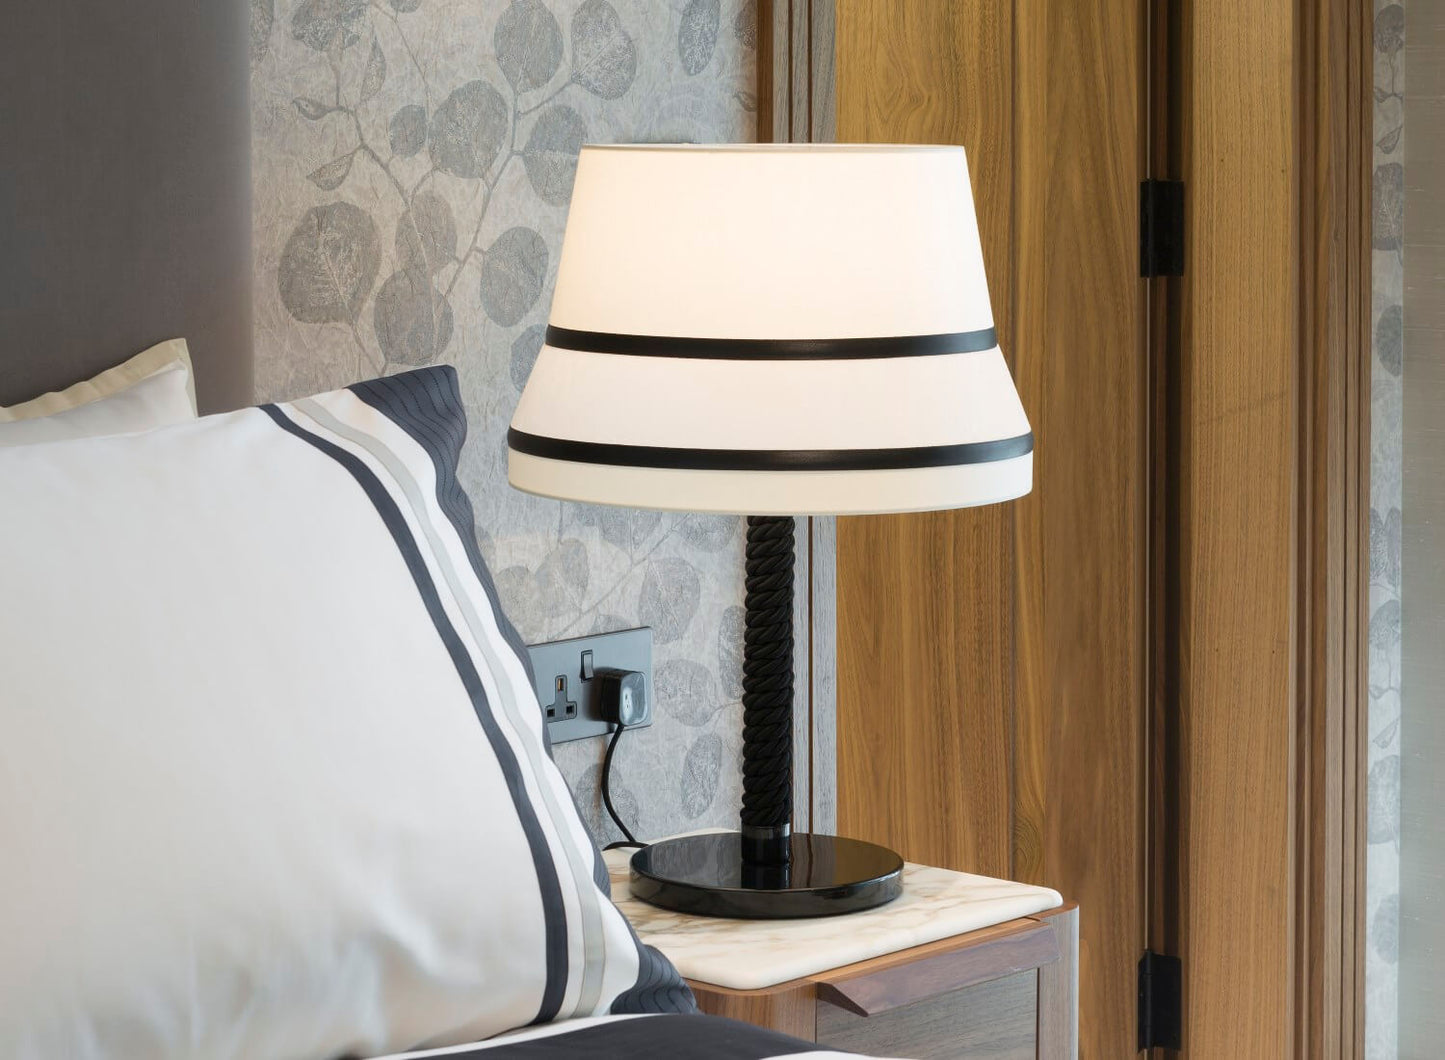 Hotel bedside table lamp